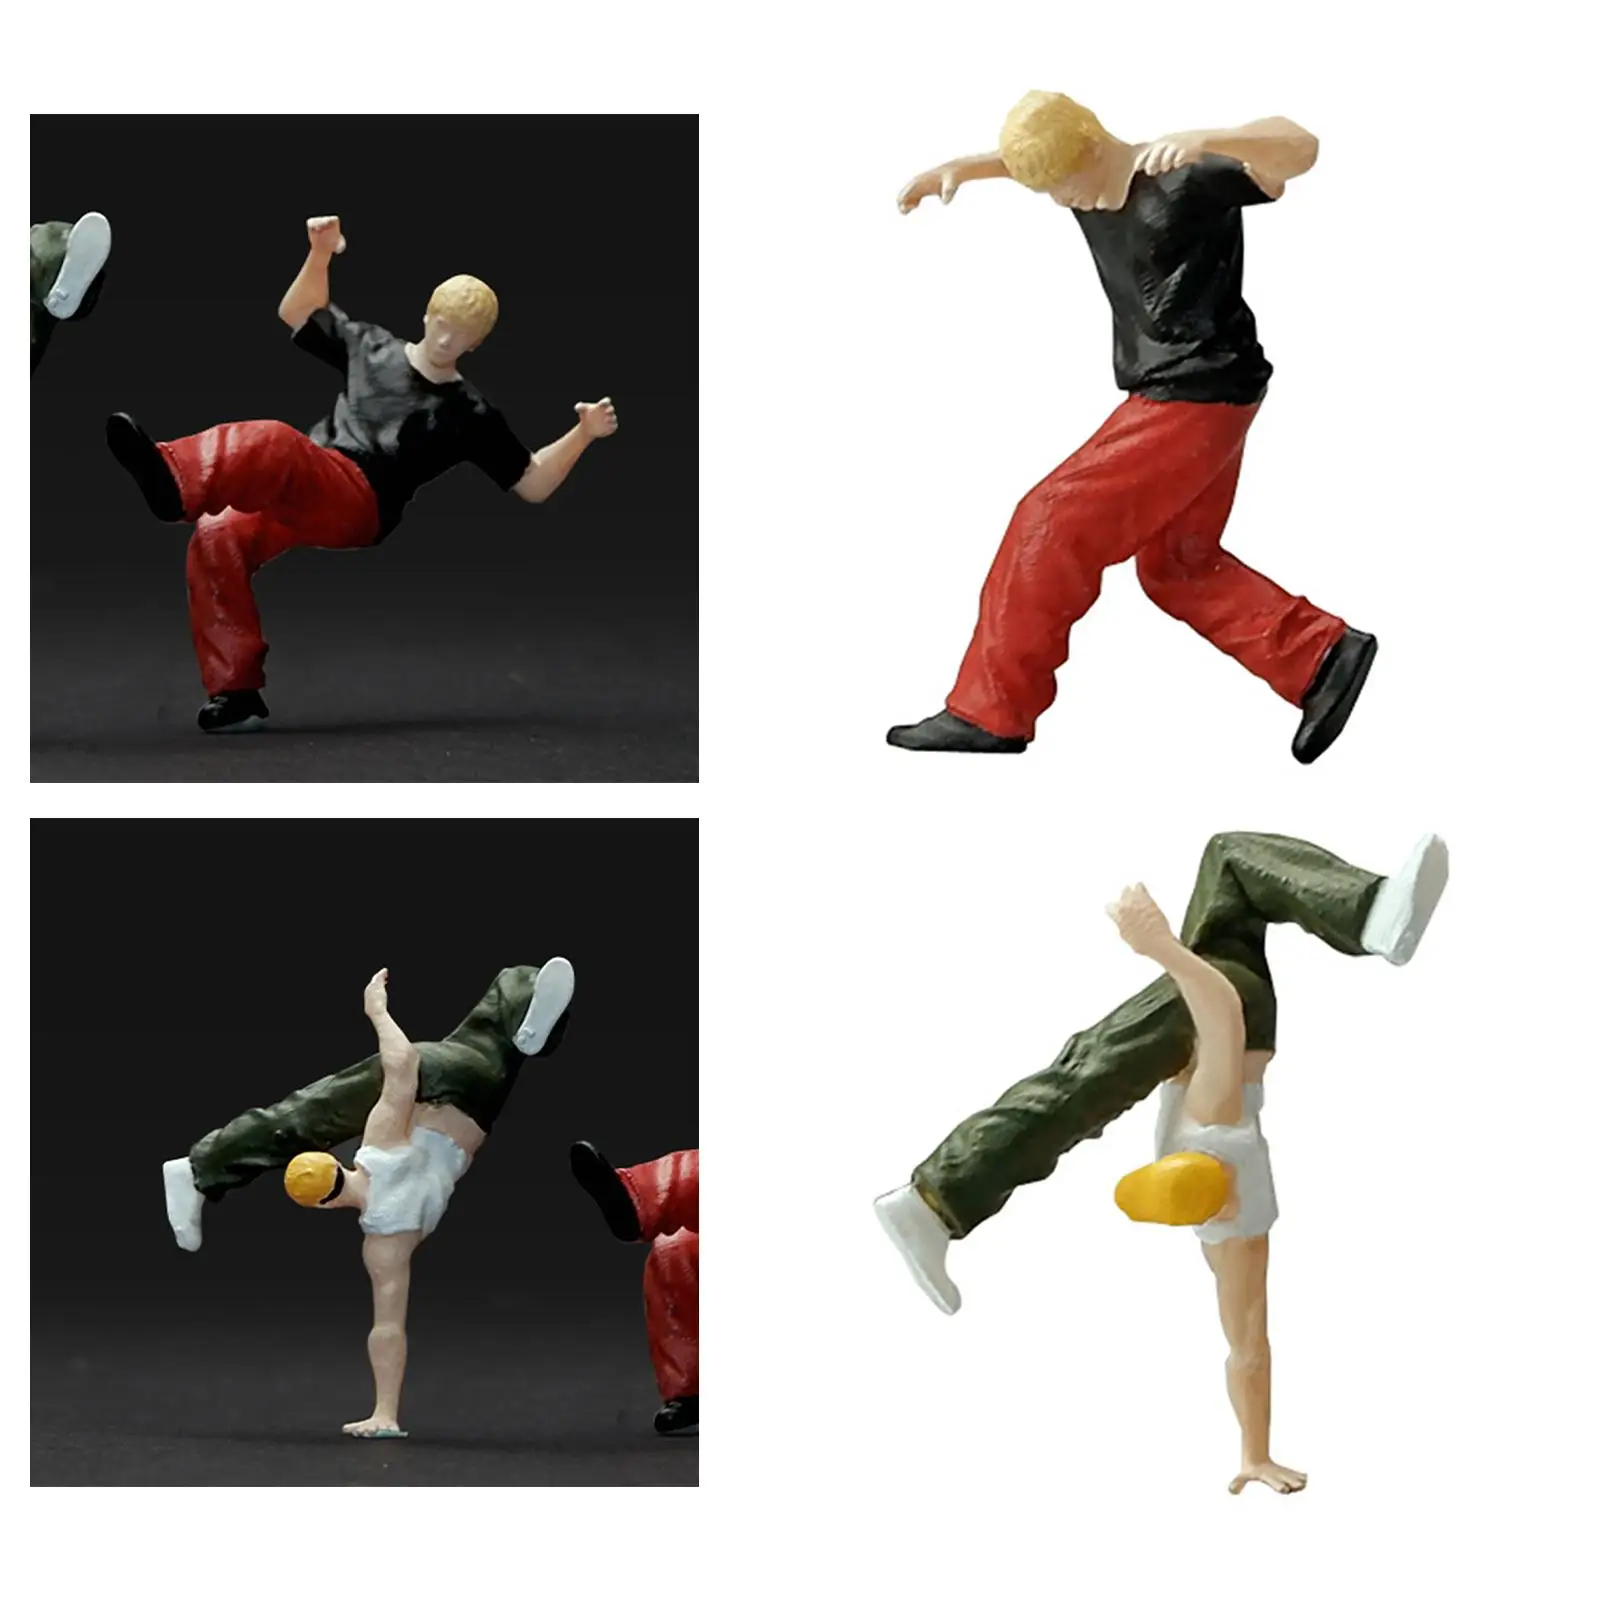 1:64 Scale Figure Street Dancer Model Tiny People for Layout Diorama Scenery Building Accessories DIY Projects Desktop Ornament